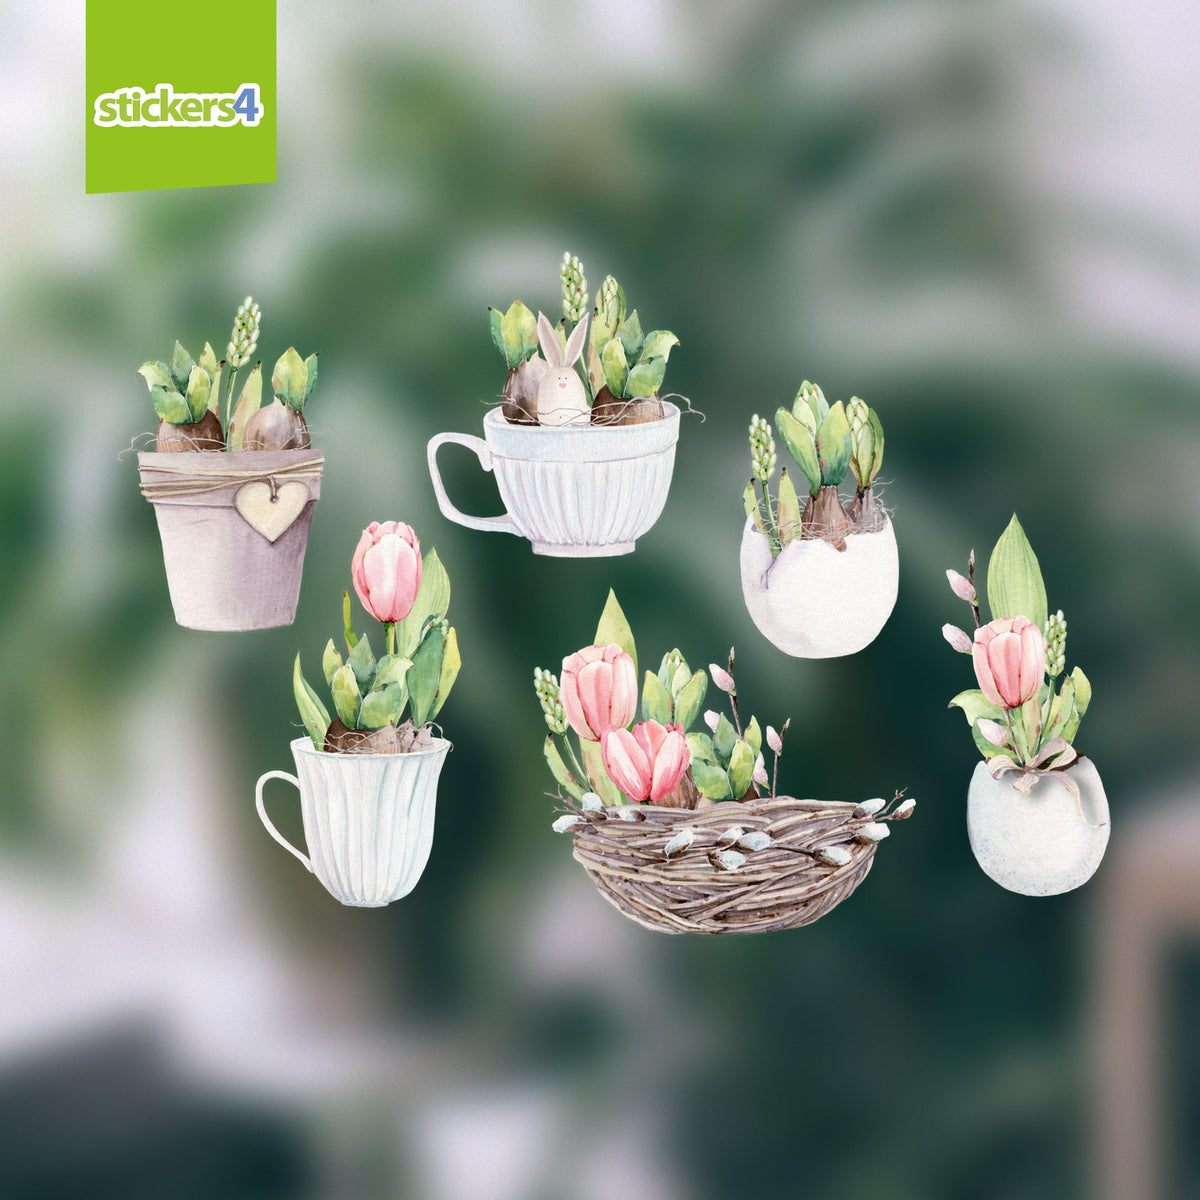 Spring Planters Window Cling Stickers Spring Window Displays